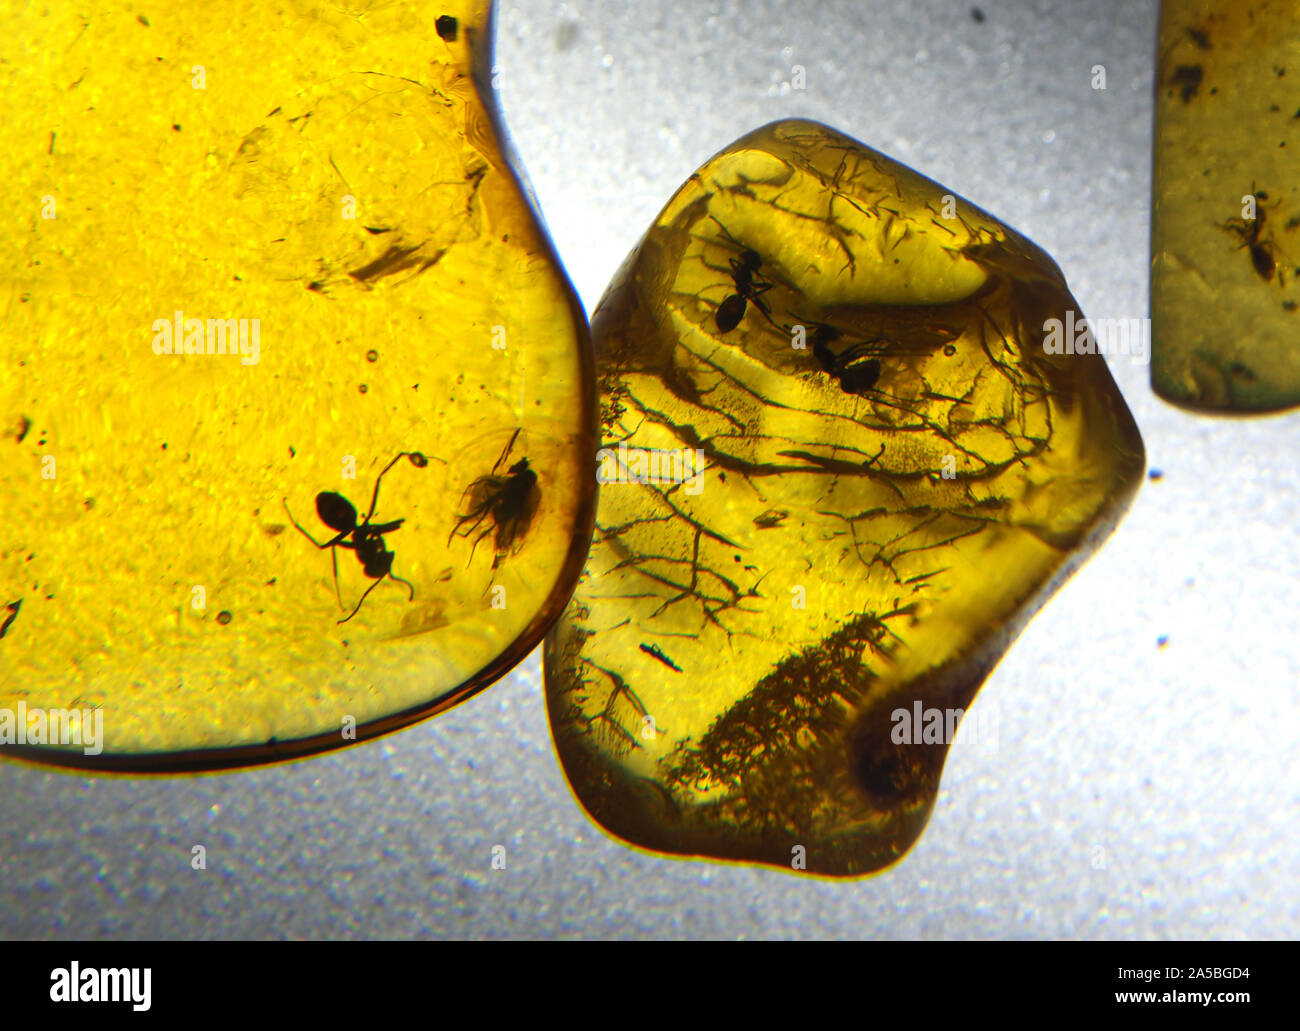 Samples of amber containing insects on display at the Amber Gallery, Nida, on The Curonian Spit, Lithuania. Stock Photo